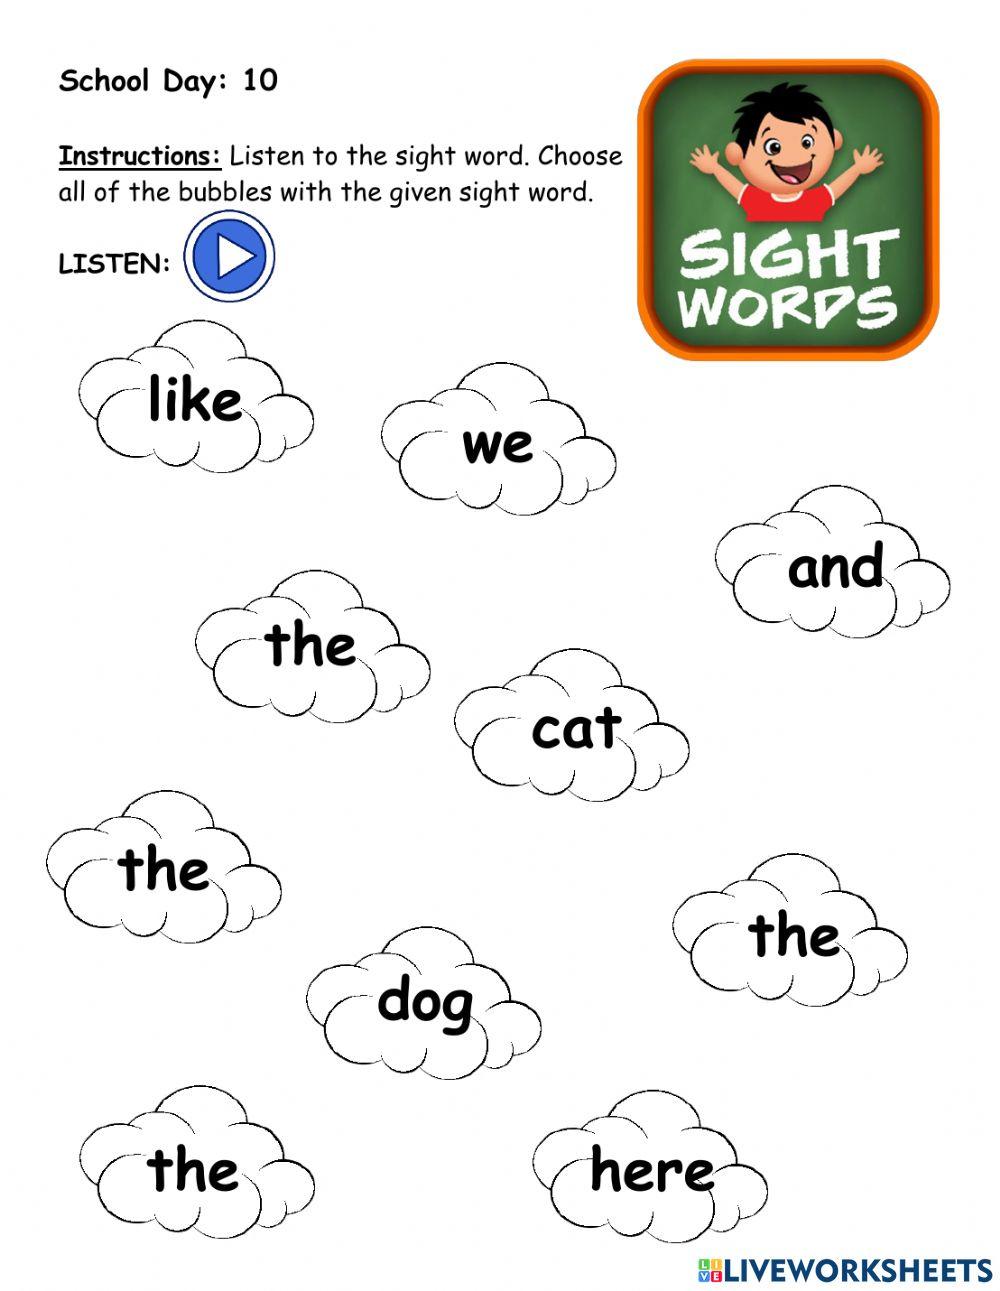 Sight word: the